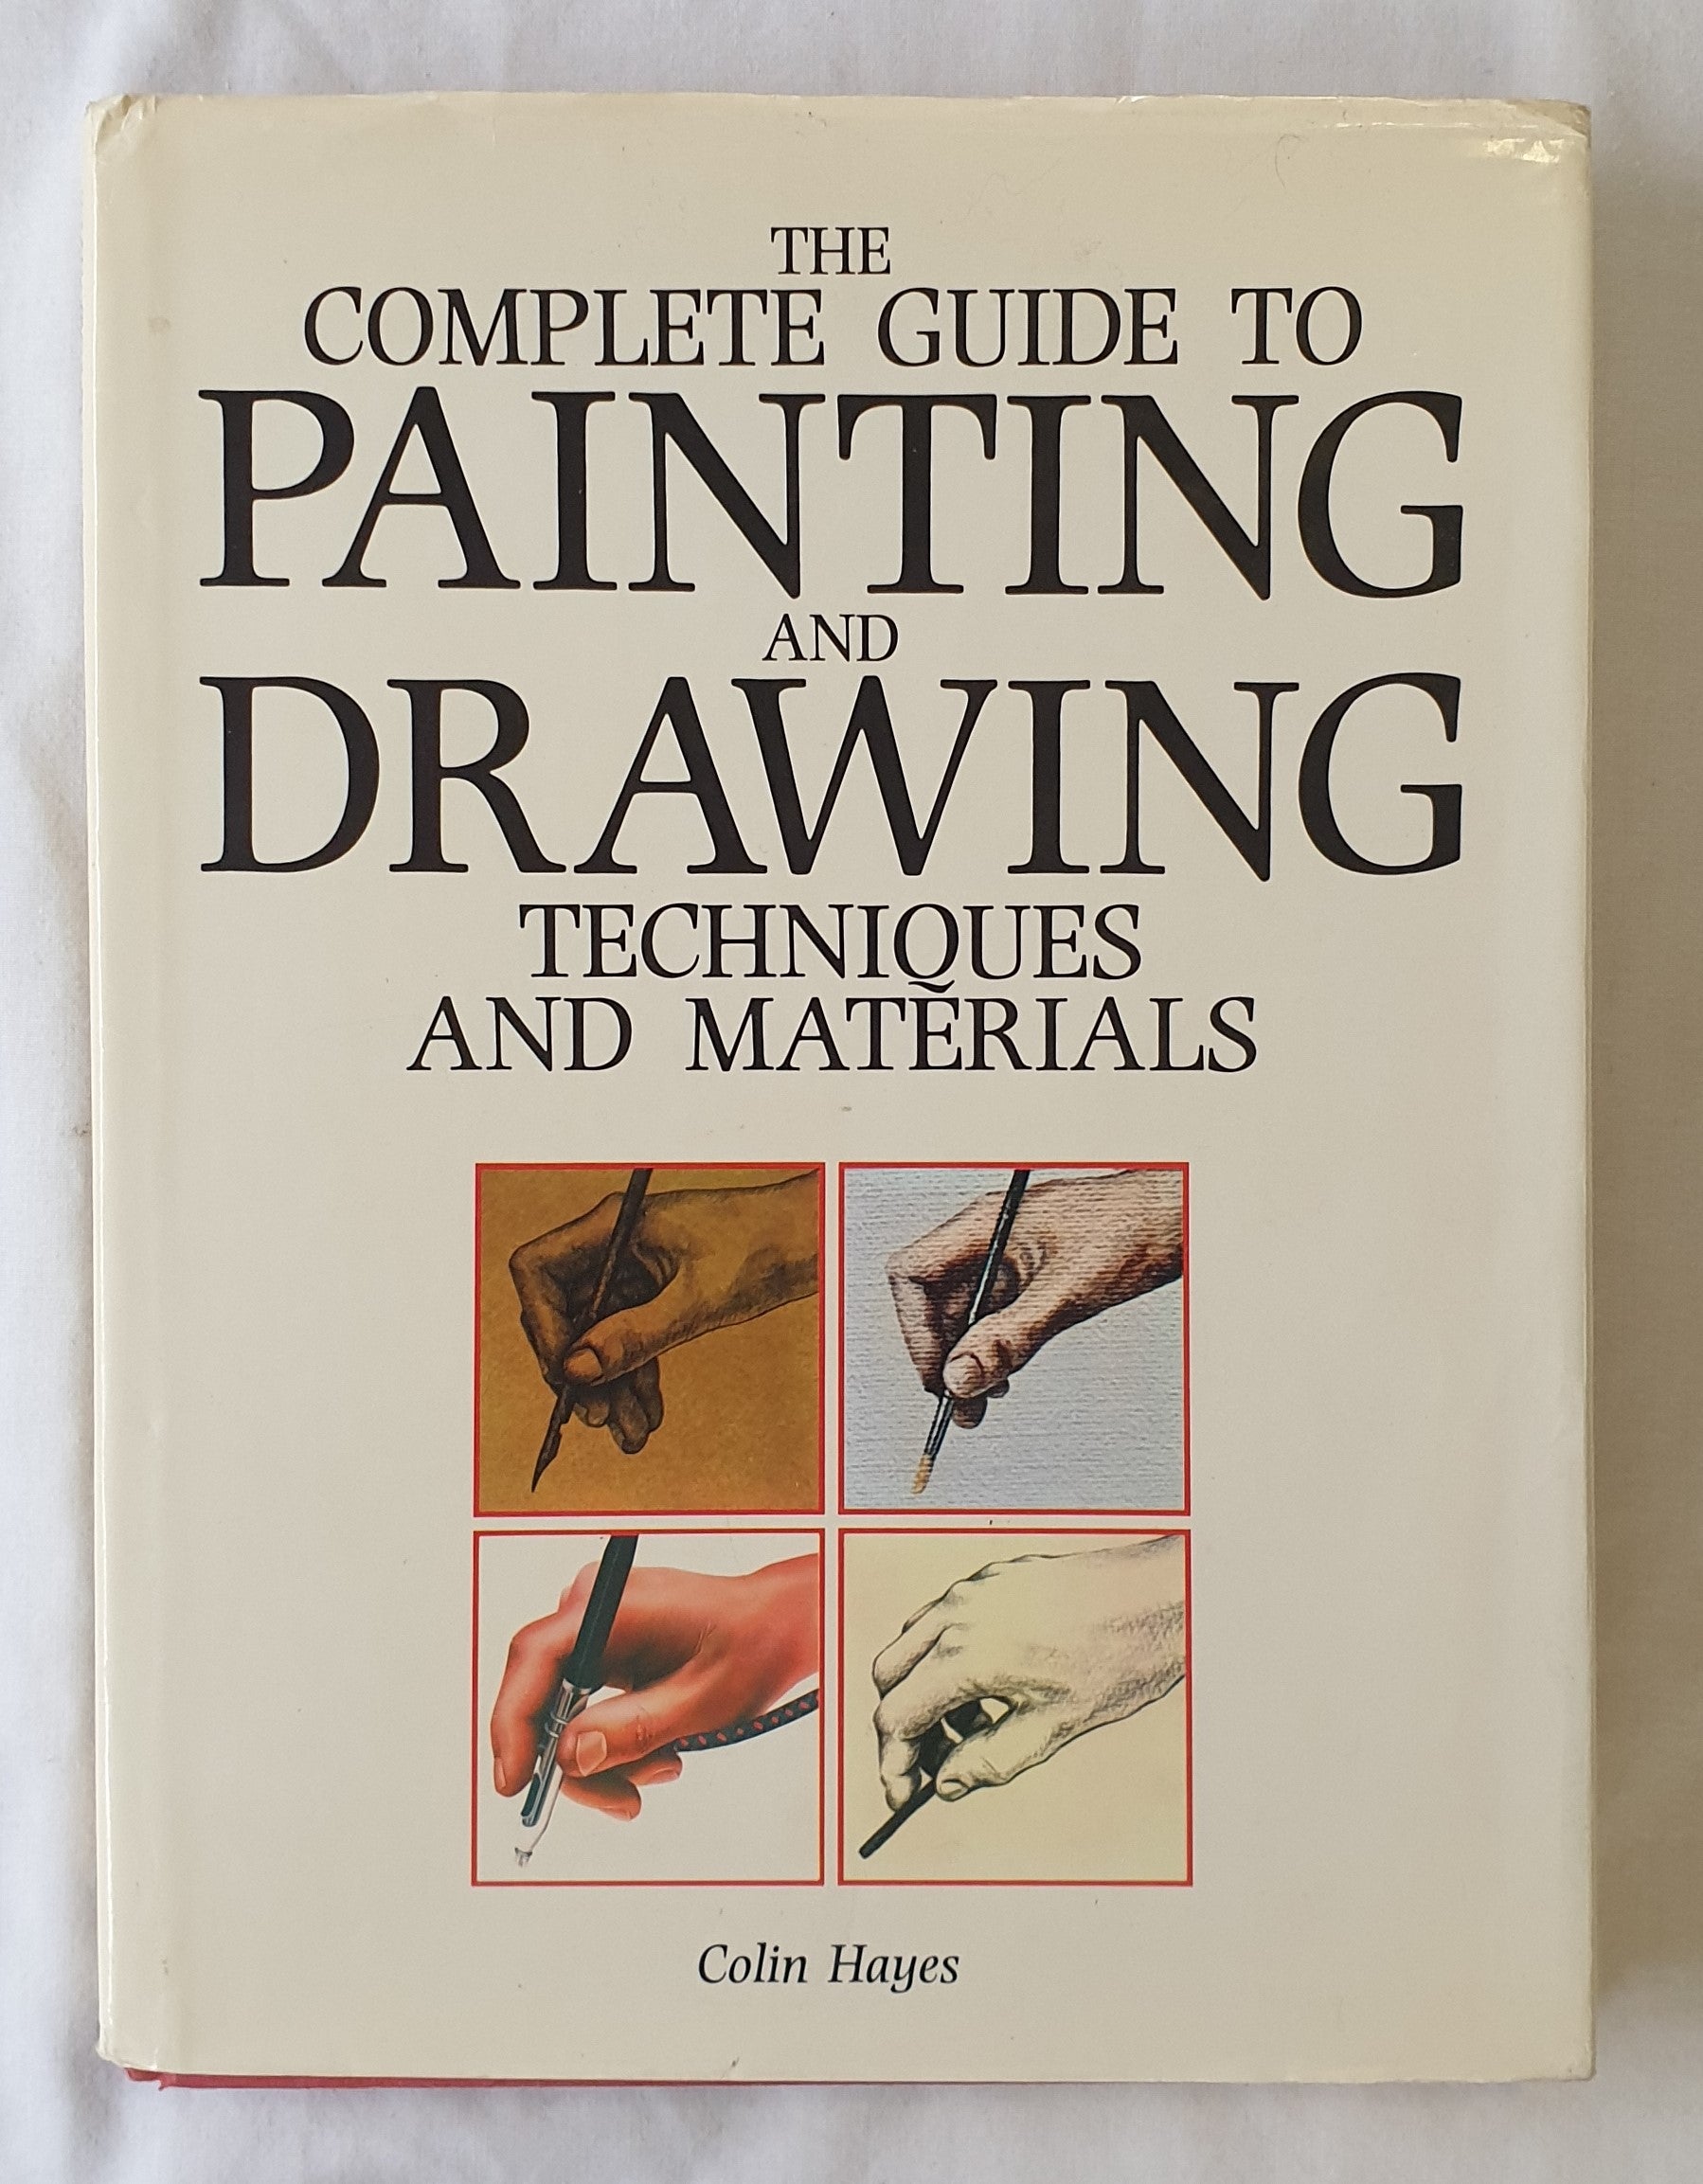 The Complete Guide to Painting and Drawing Techniques and Materials by Colin Hayes